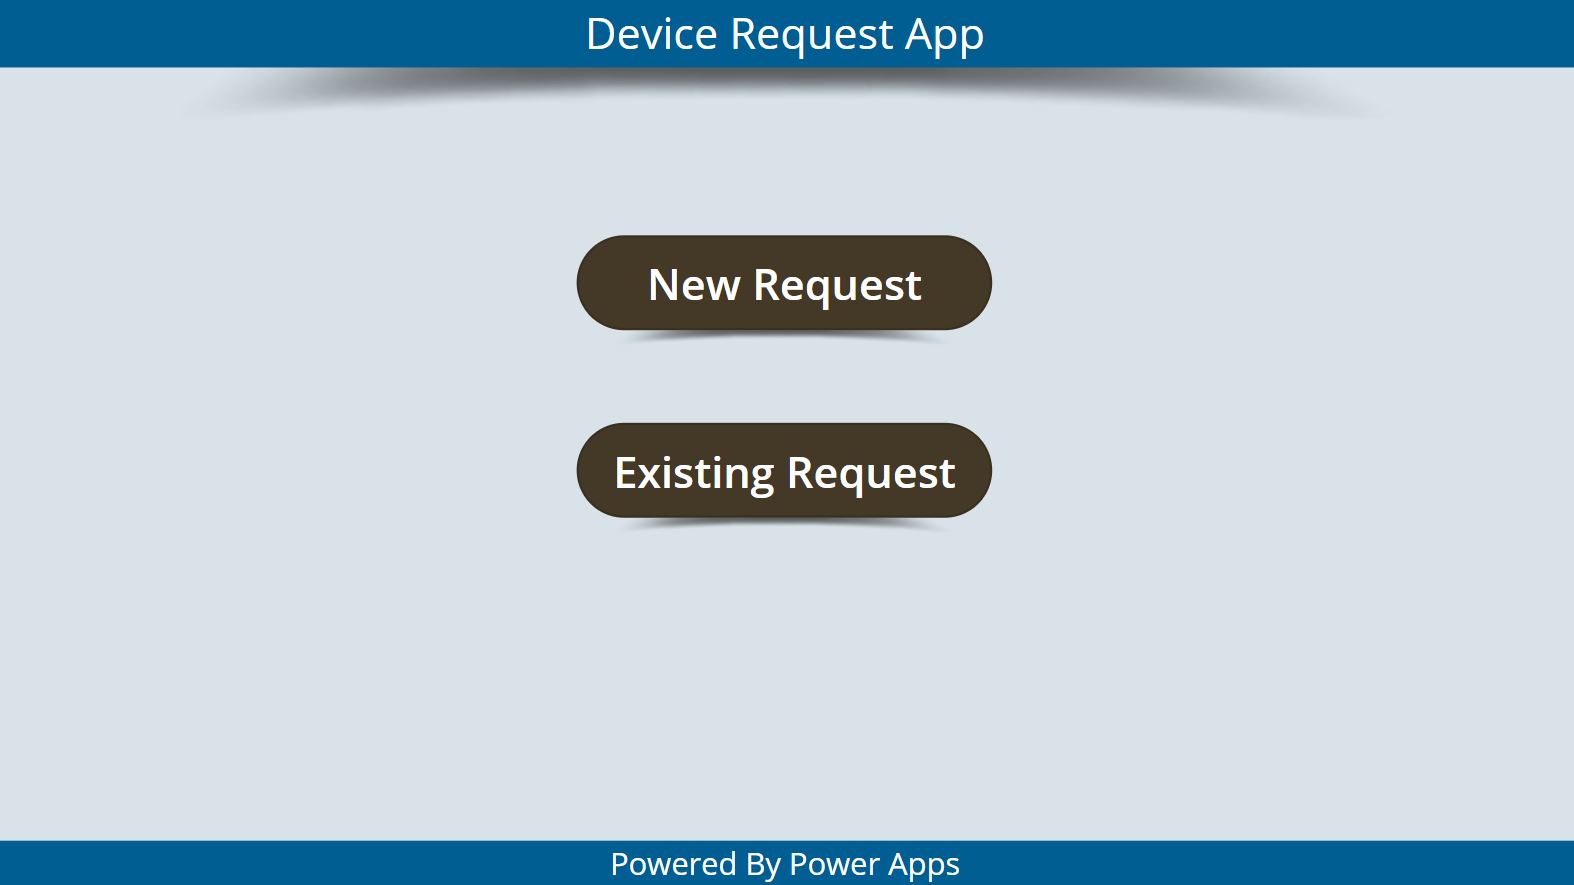 Screenshot of the Device Request App with two buttons.